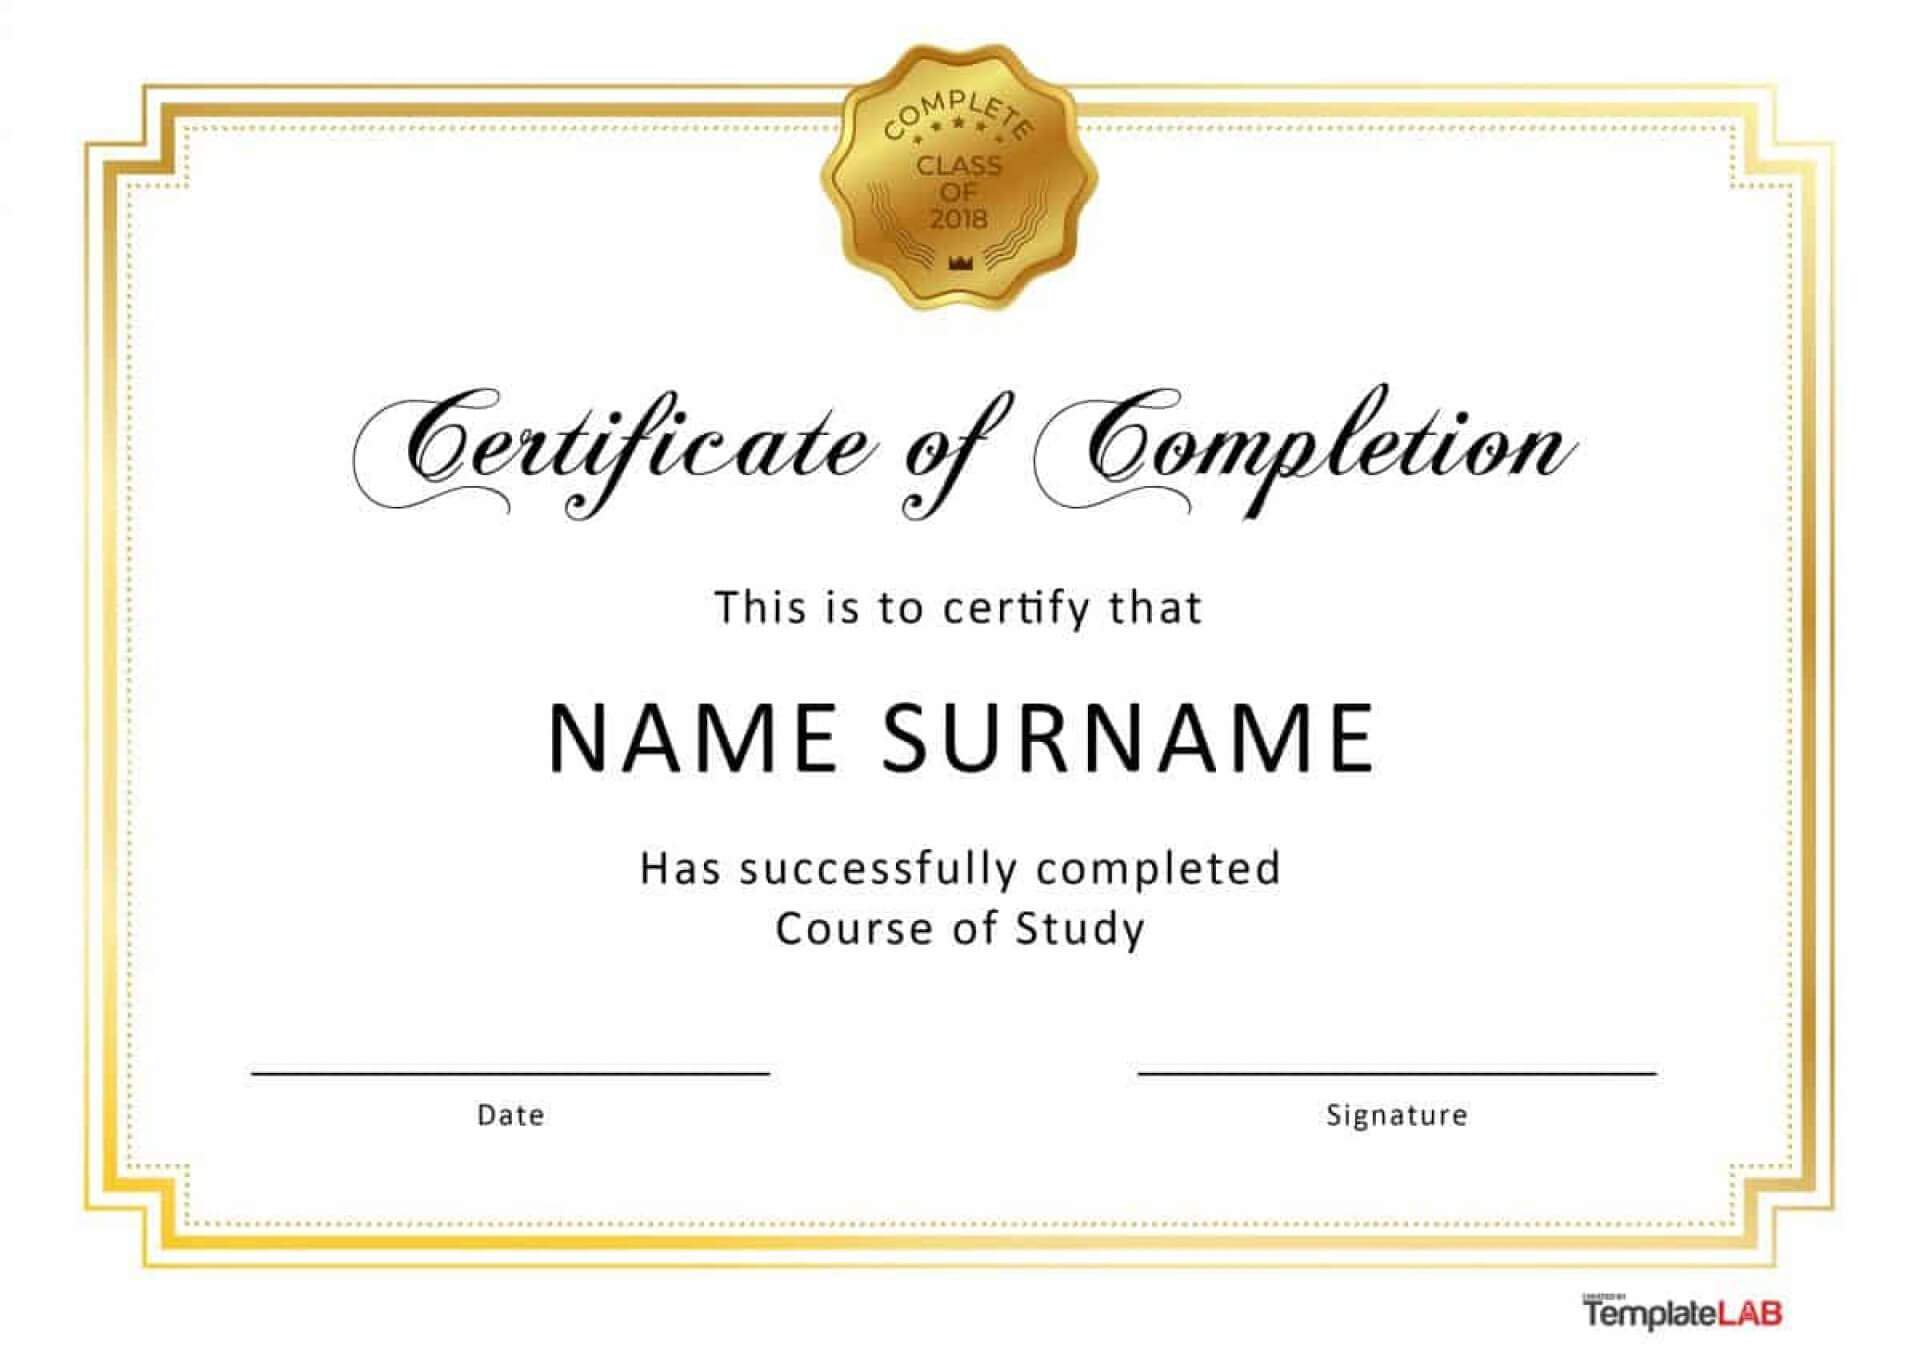 040 Certificate Of Completion Template Word Ideas Army Camo For Army Certificate Of Completion Template